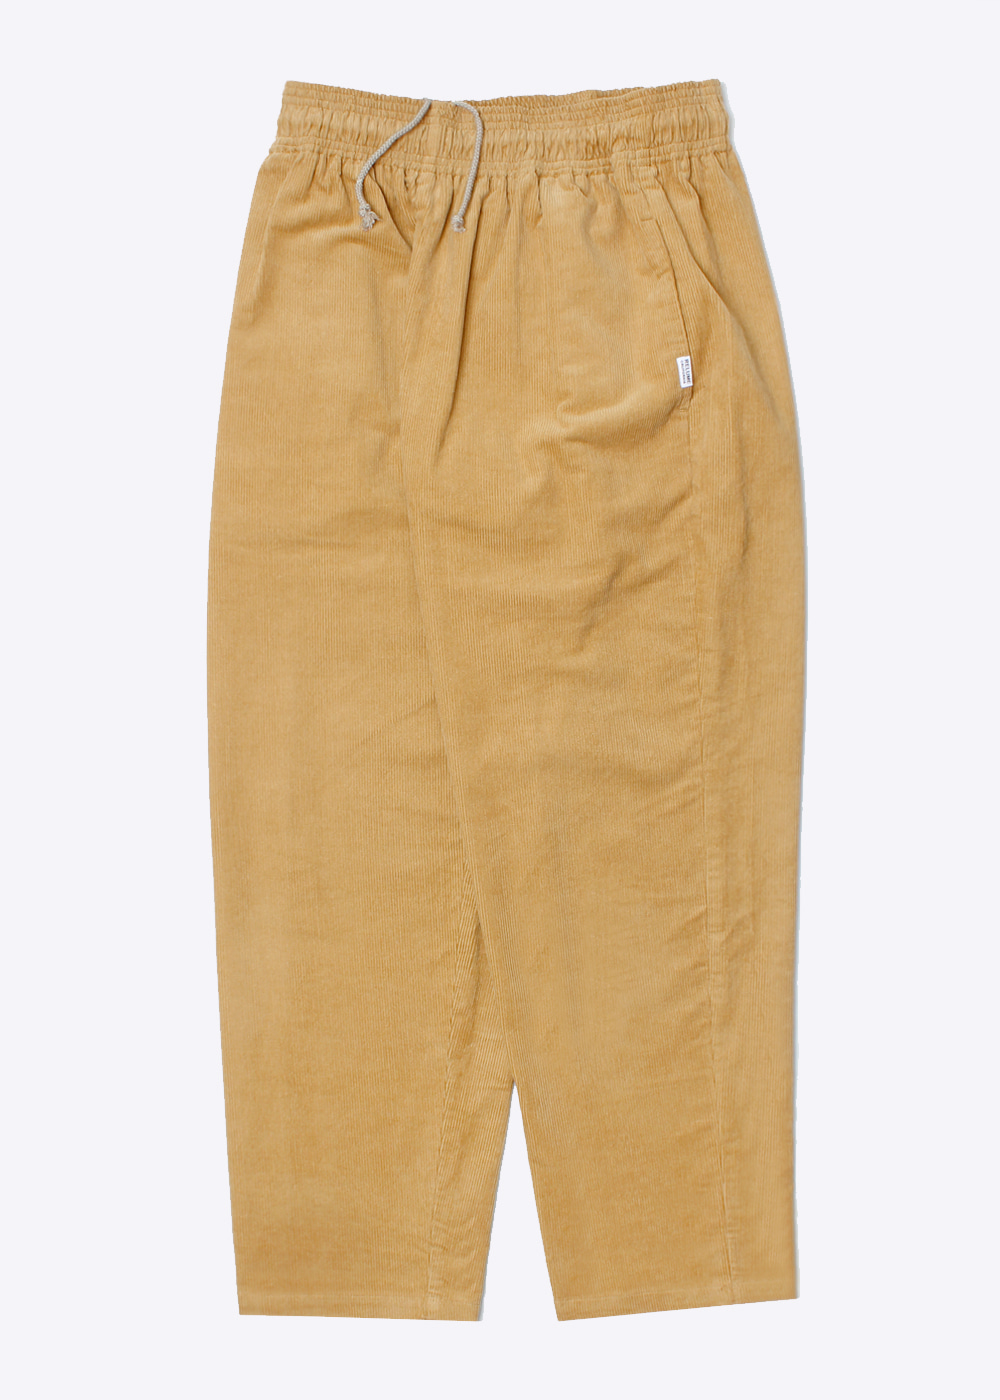 RELUME BY JOURNAL STANDARD’relax fit’ corduroy pants